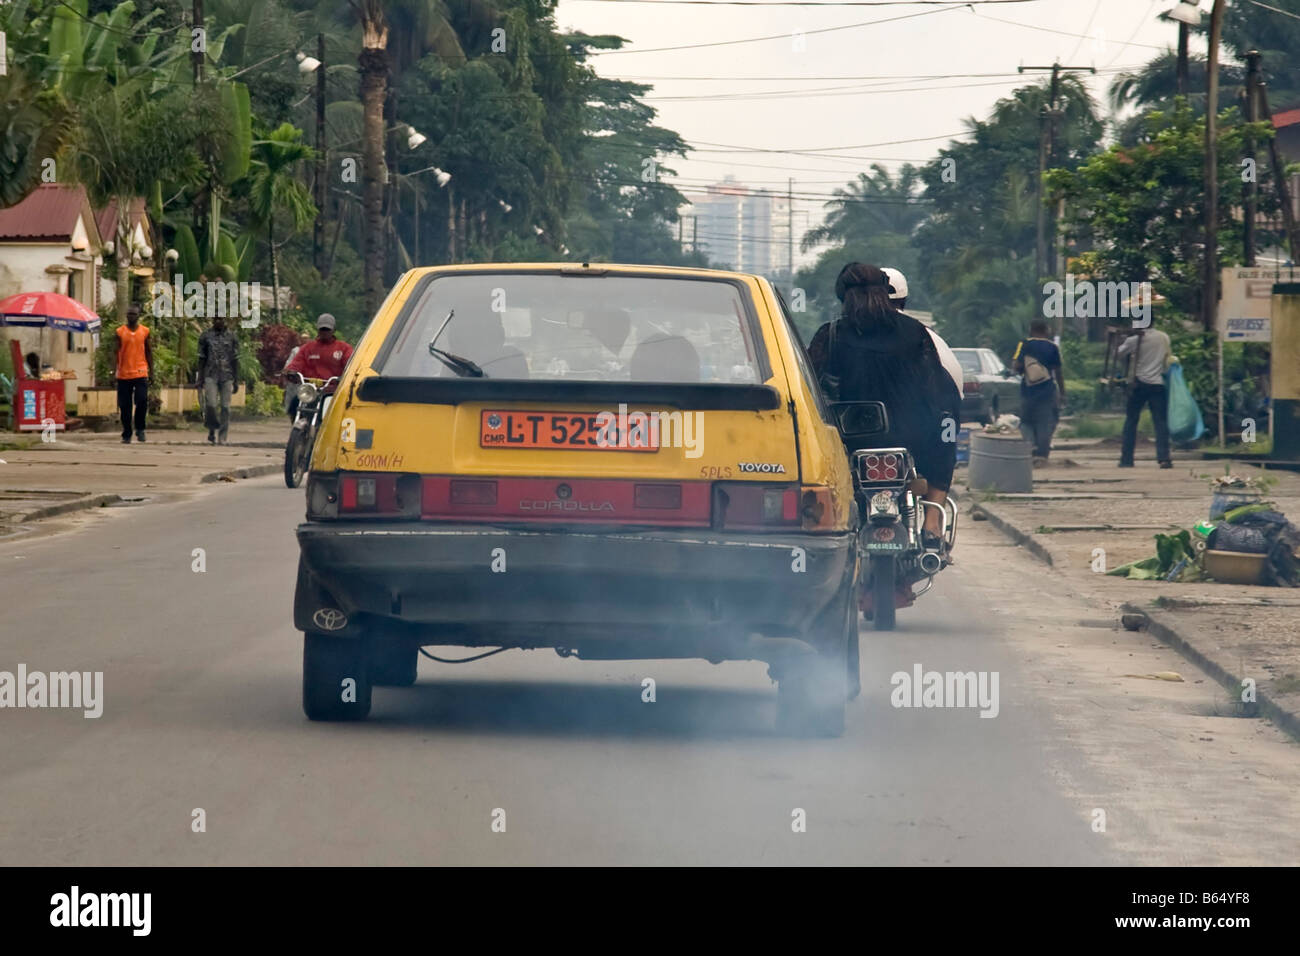 Taxi exhaust fumes, Douala, Cameroon, Africa Stock Photo